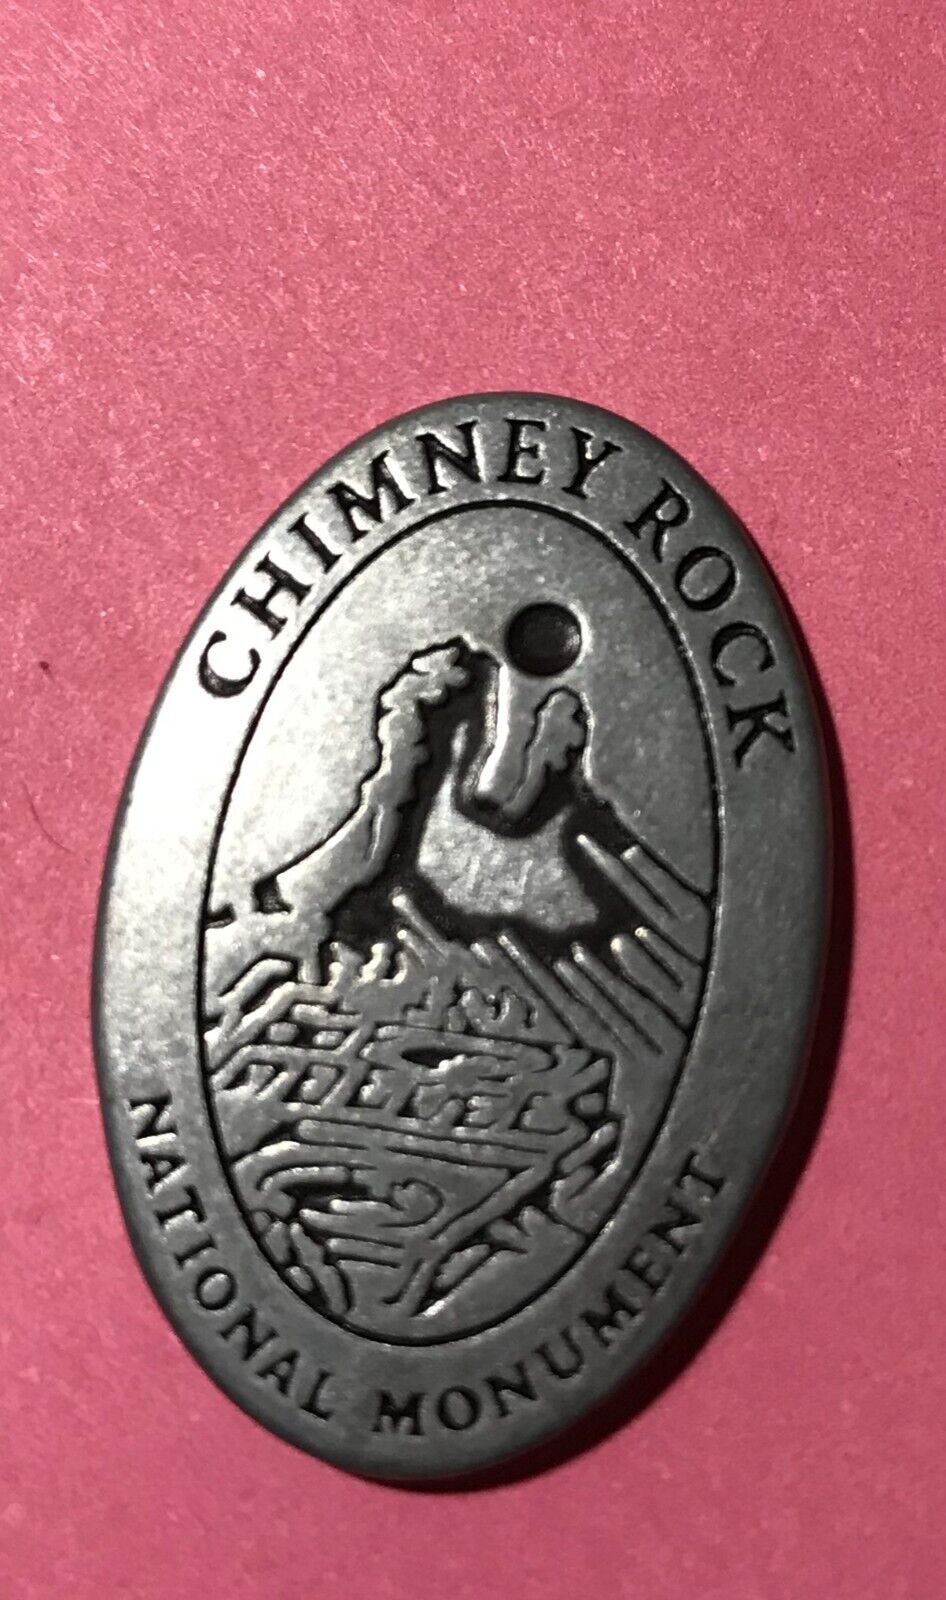 Chimney Rock National Monument Collectible Token